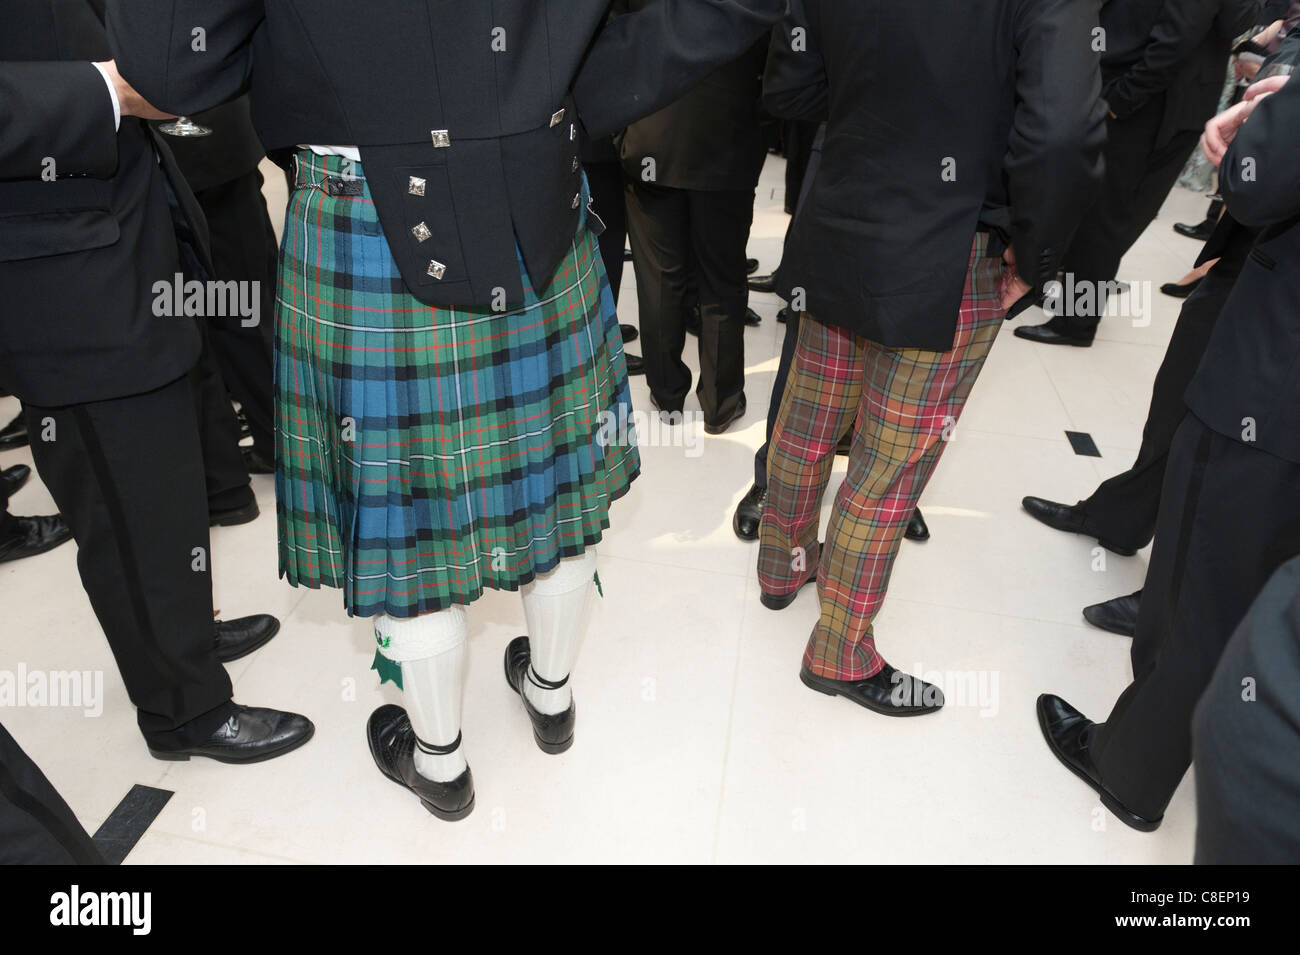 Tartan kilt and trousers as worn at a formal event by men of Scottish heritage. Stock Photo